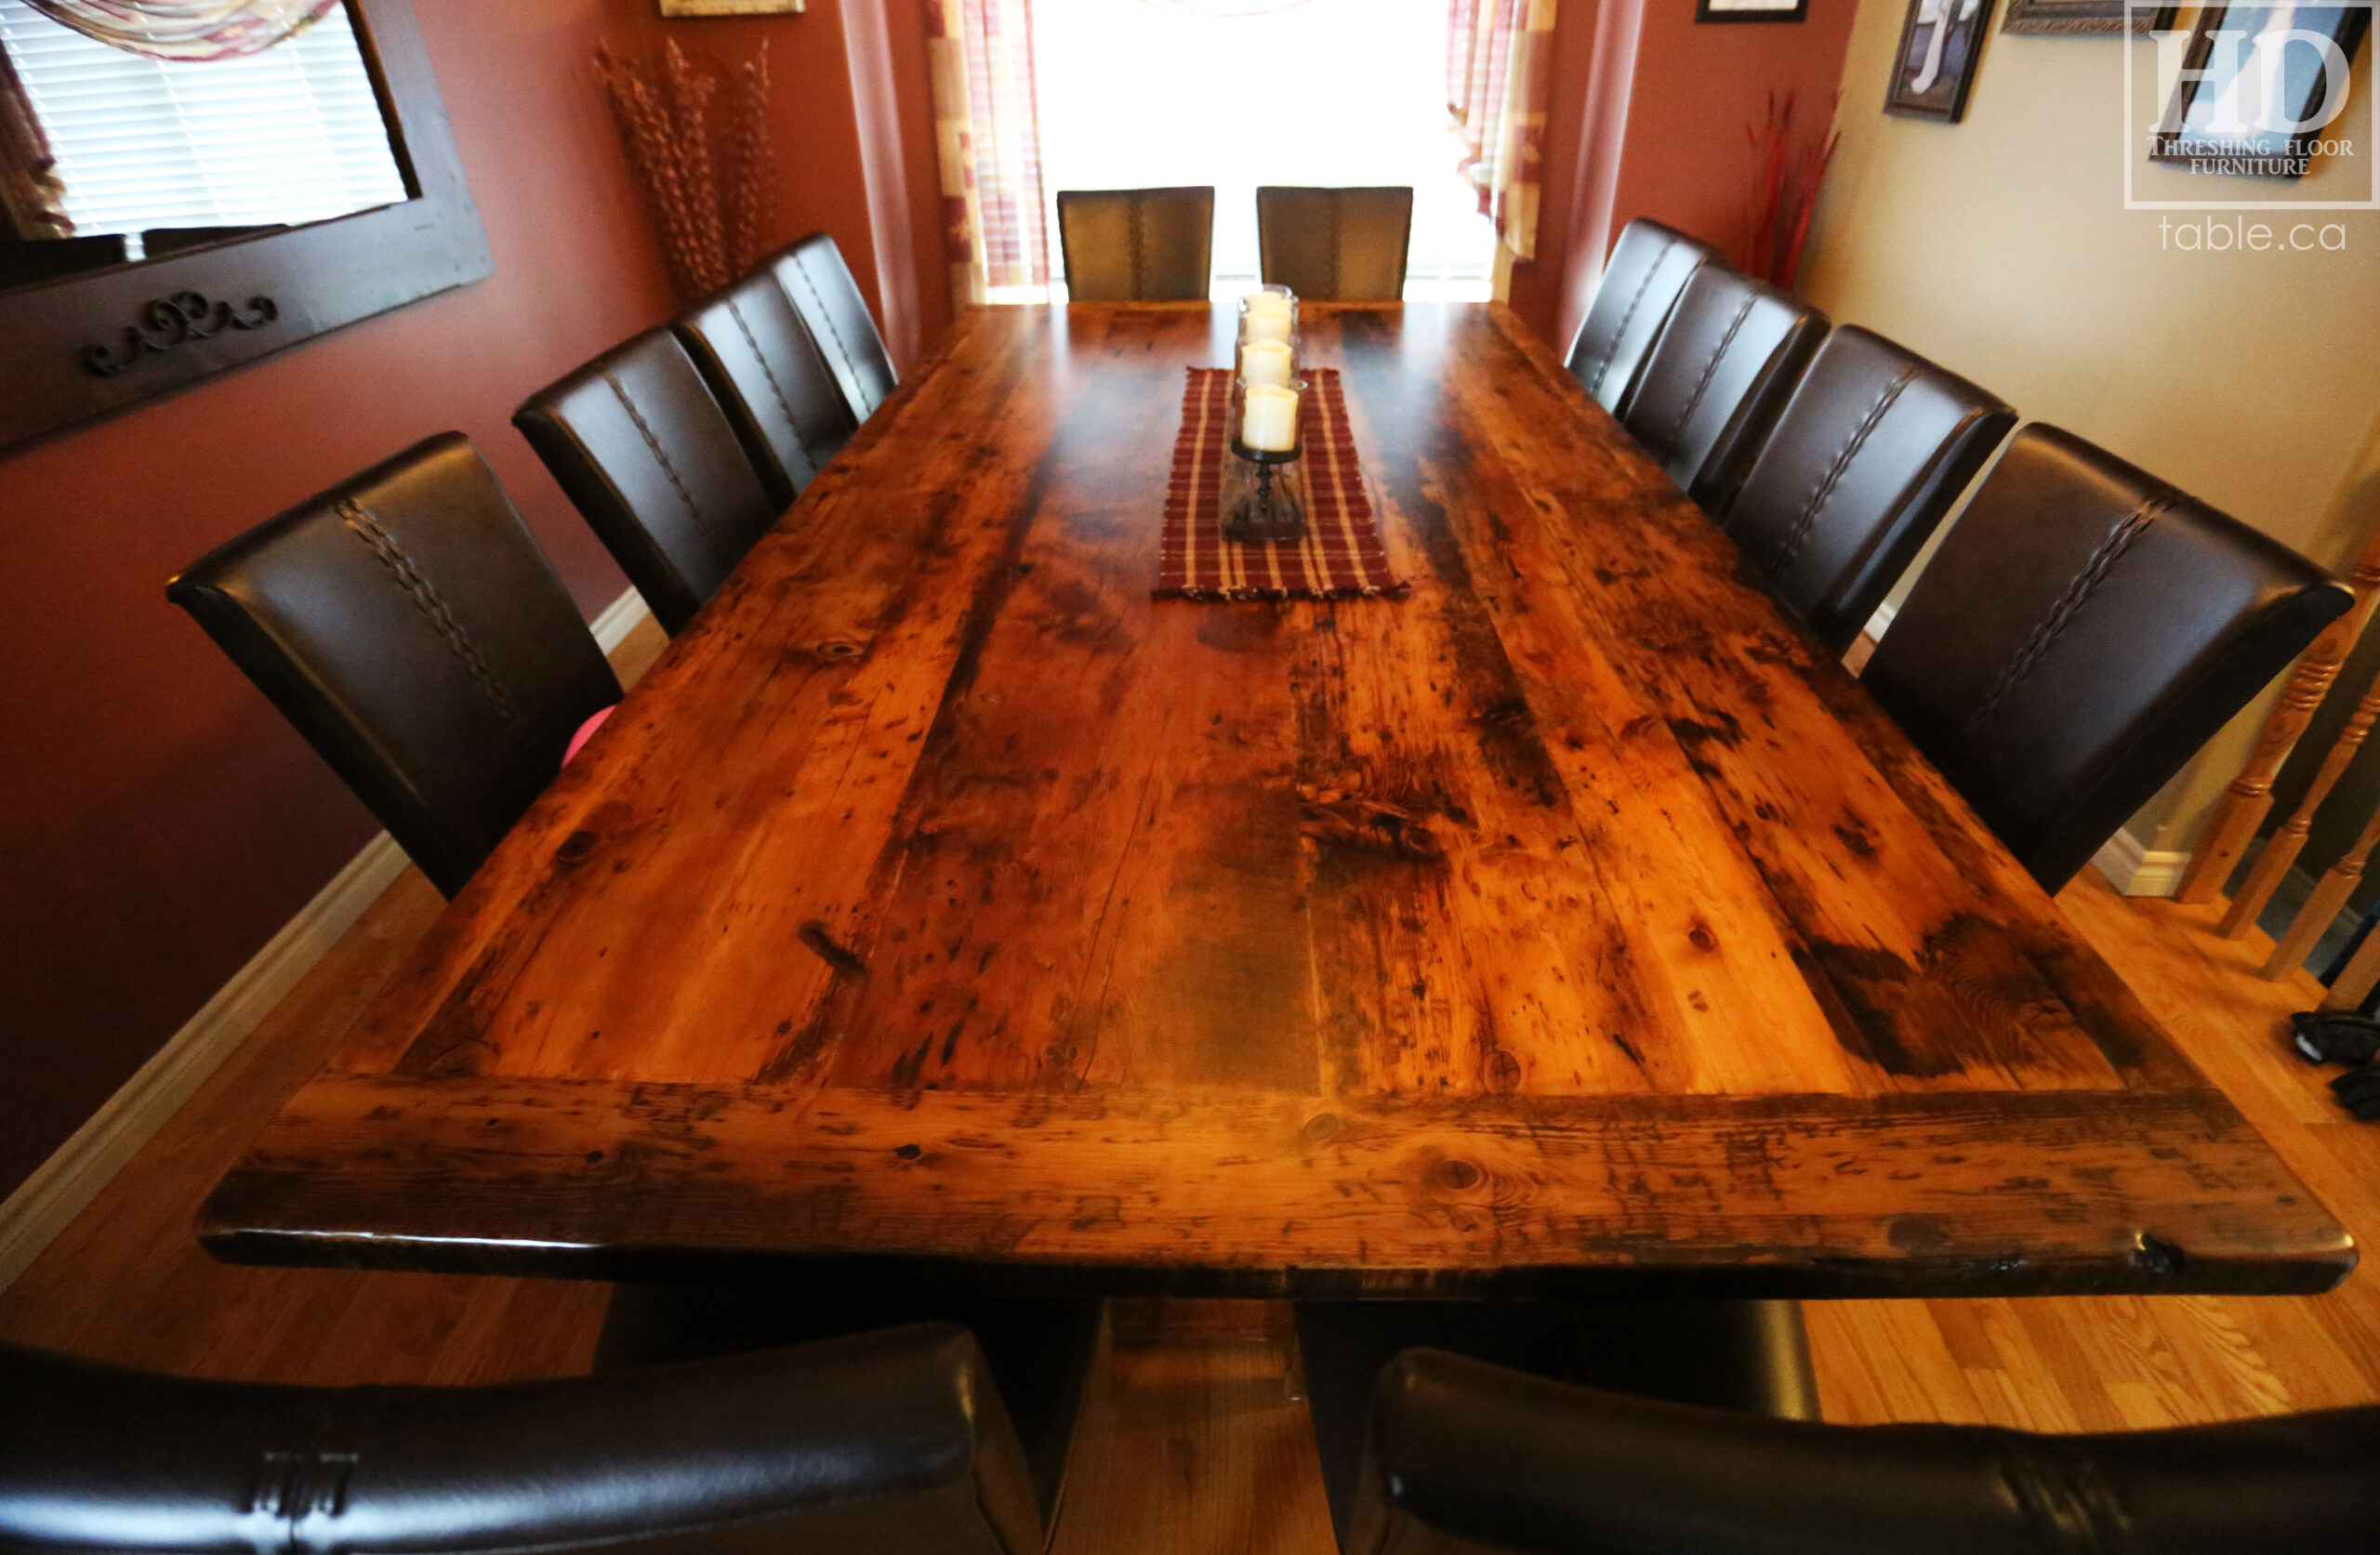 Reclaimed Wood Table with Trestle Base by HD Threshing Floor Furniture / www.table.ca